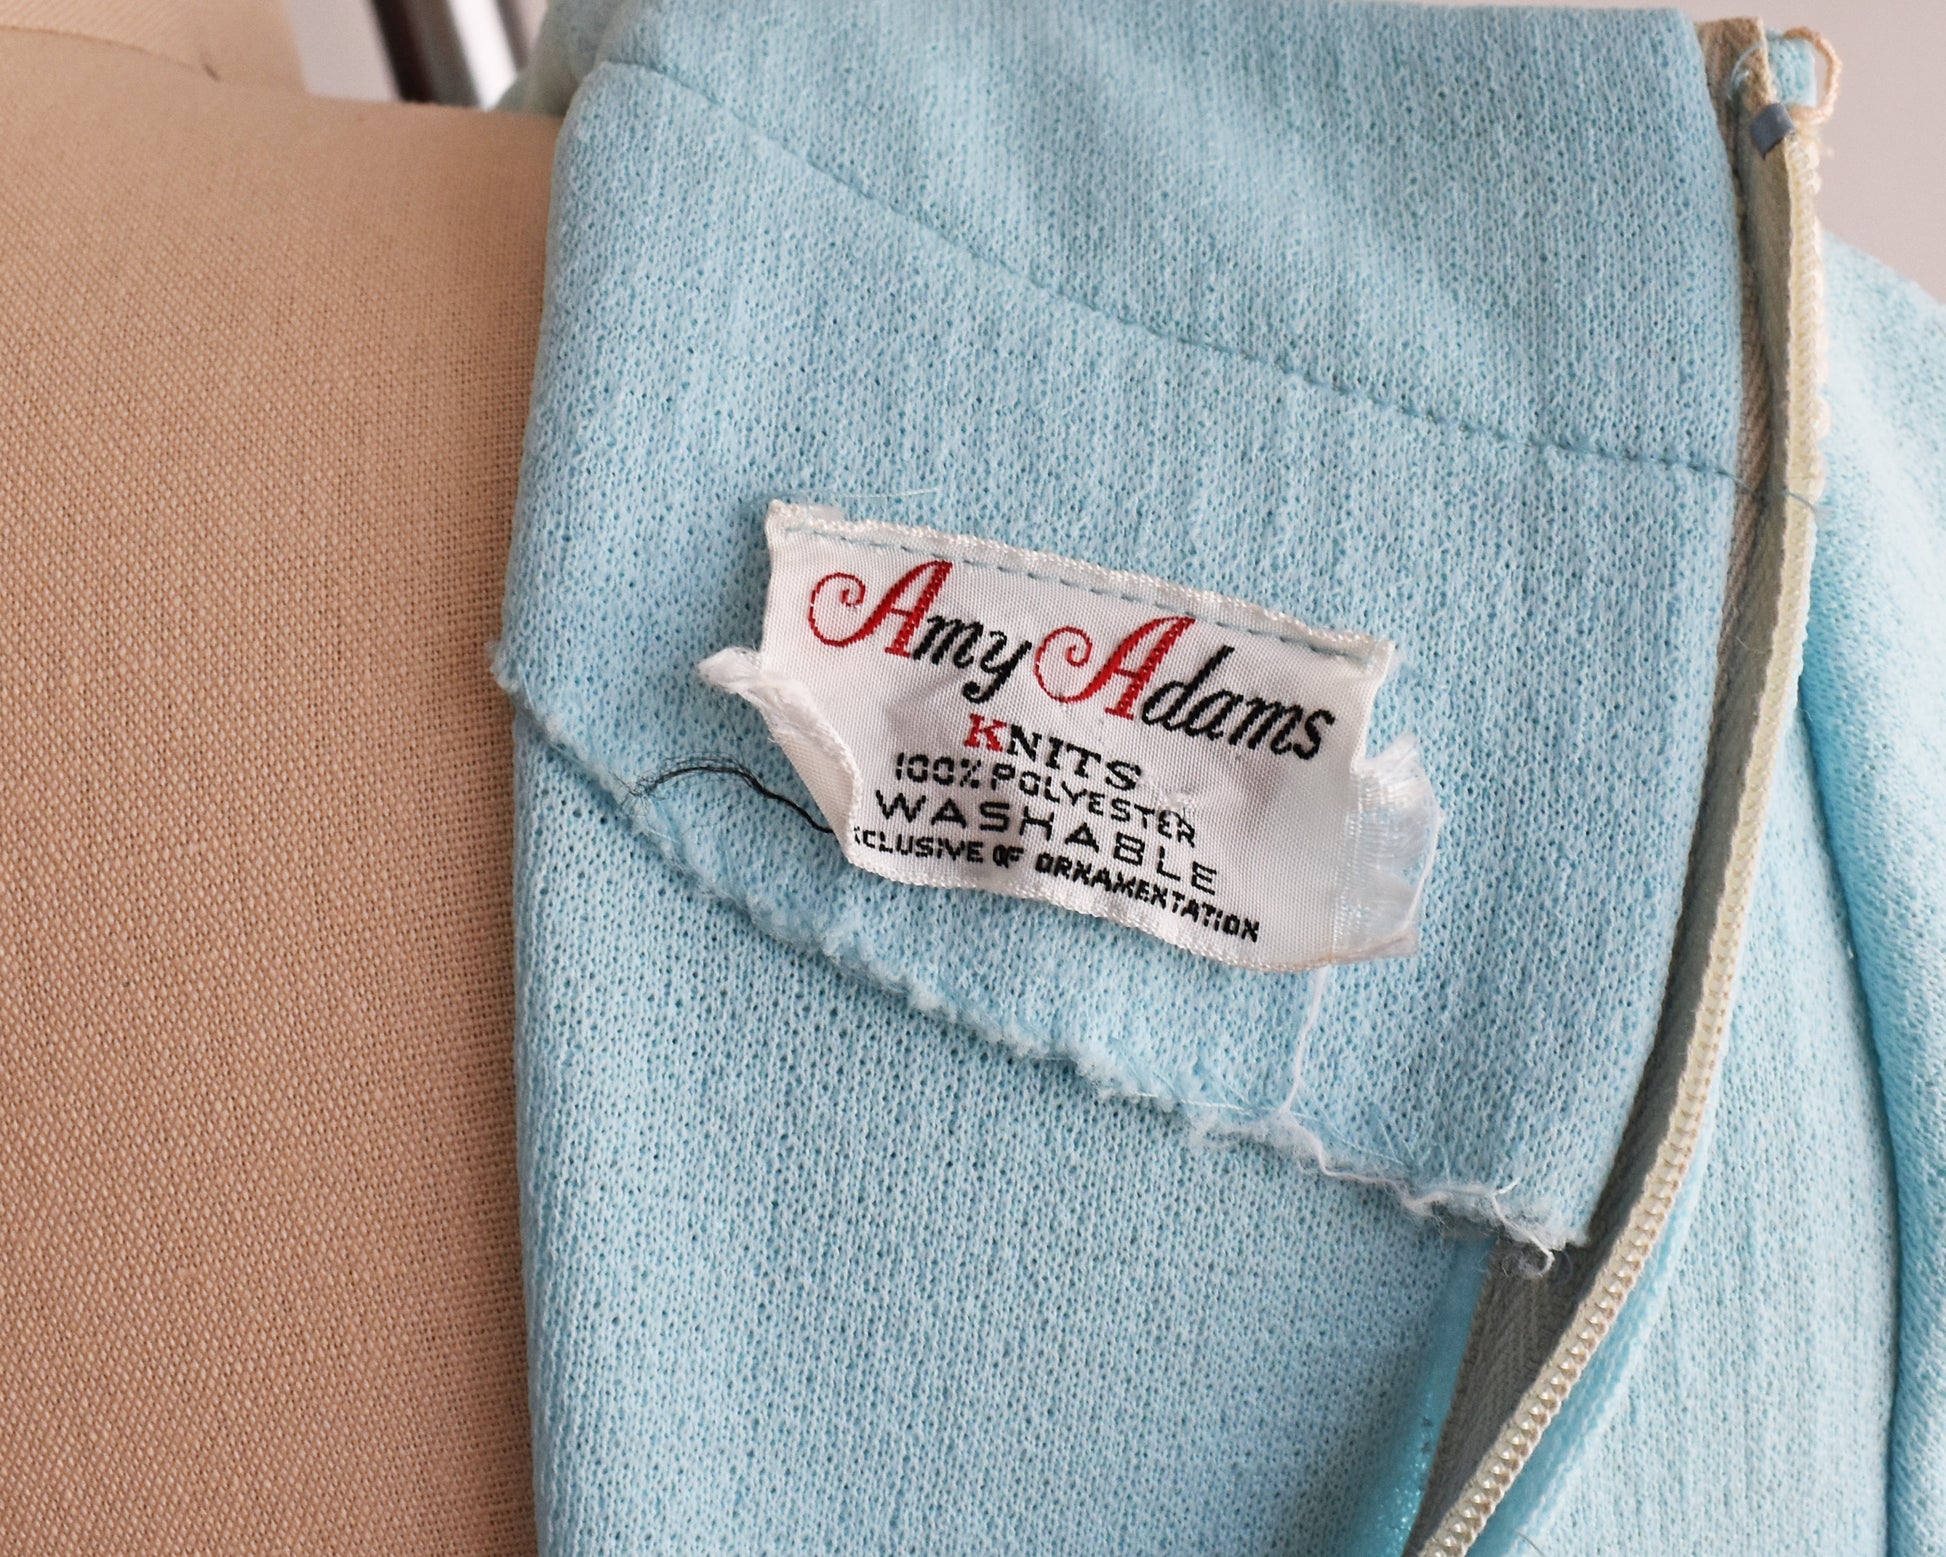 close up of the tag which says Amy Adams Knits